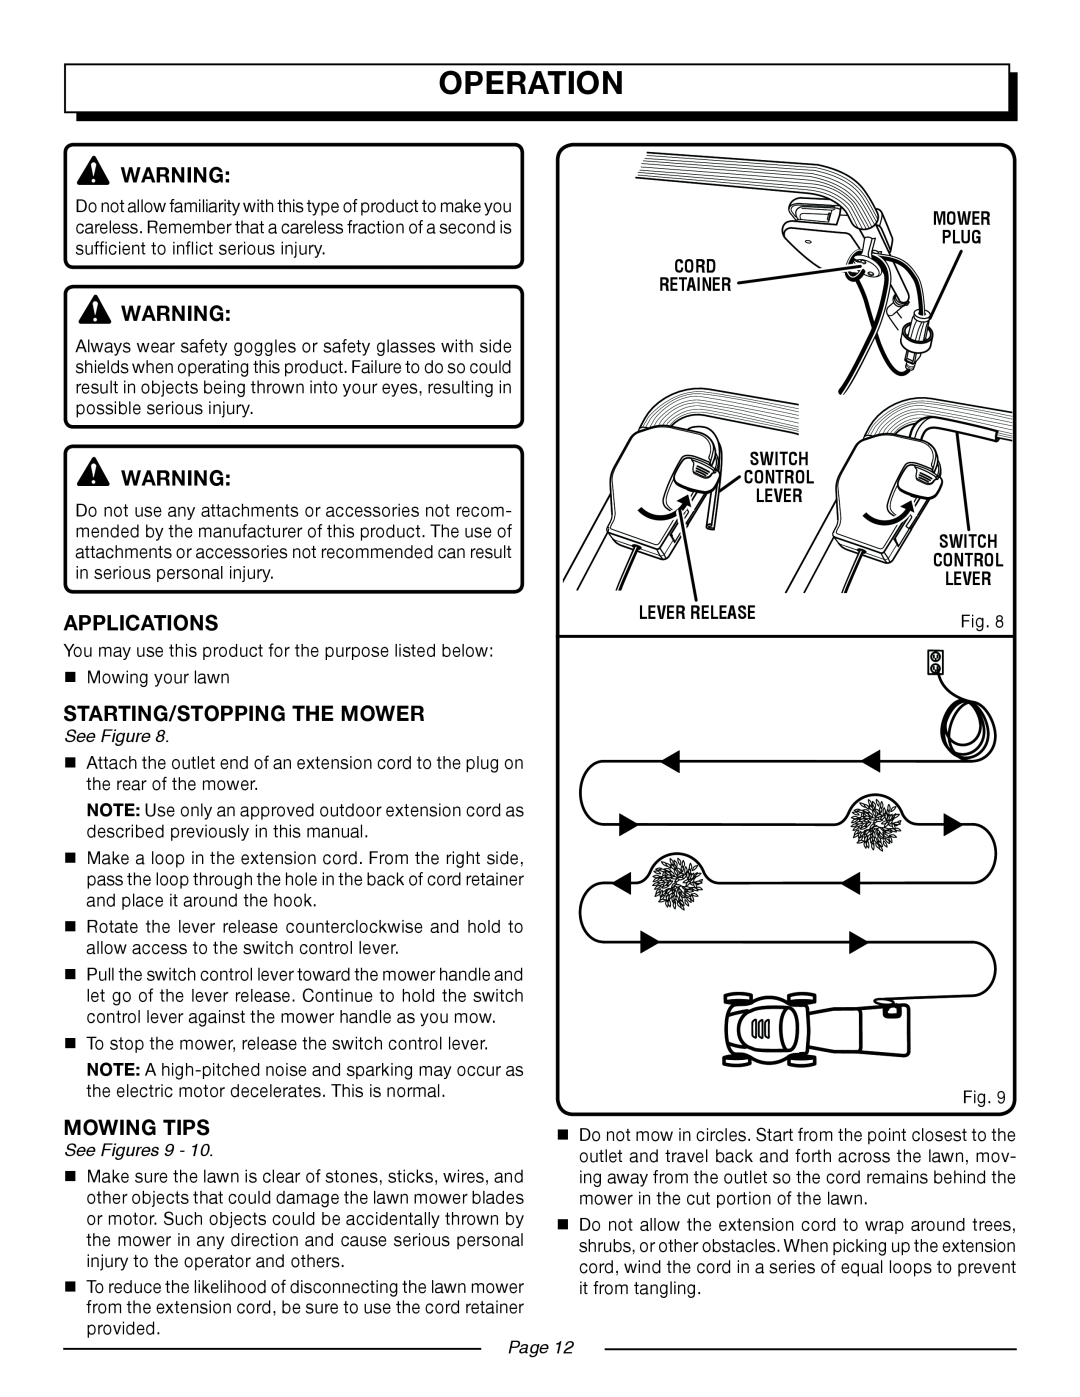 Homelite UT13118 Operation, Applications, Starting/Stopping The Mower, Mowing Tips, See Figures 9, Mower Plug, Page 